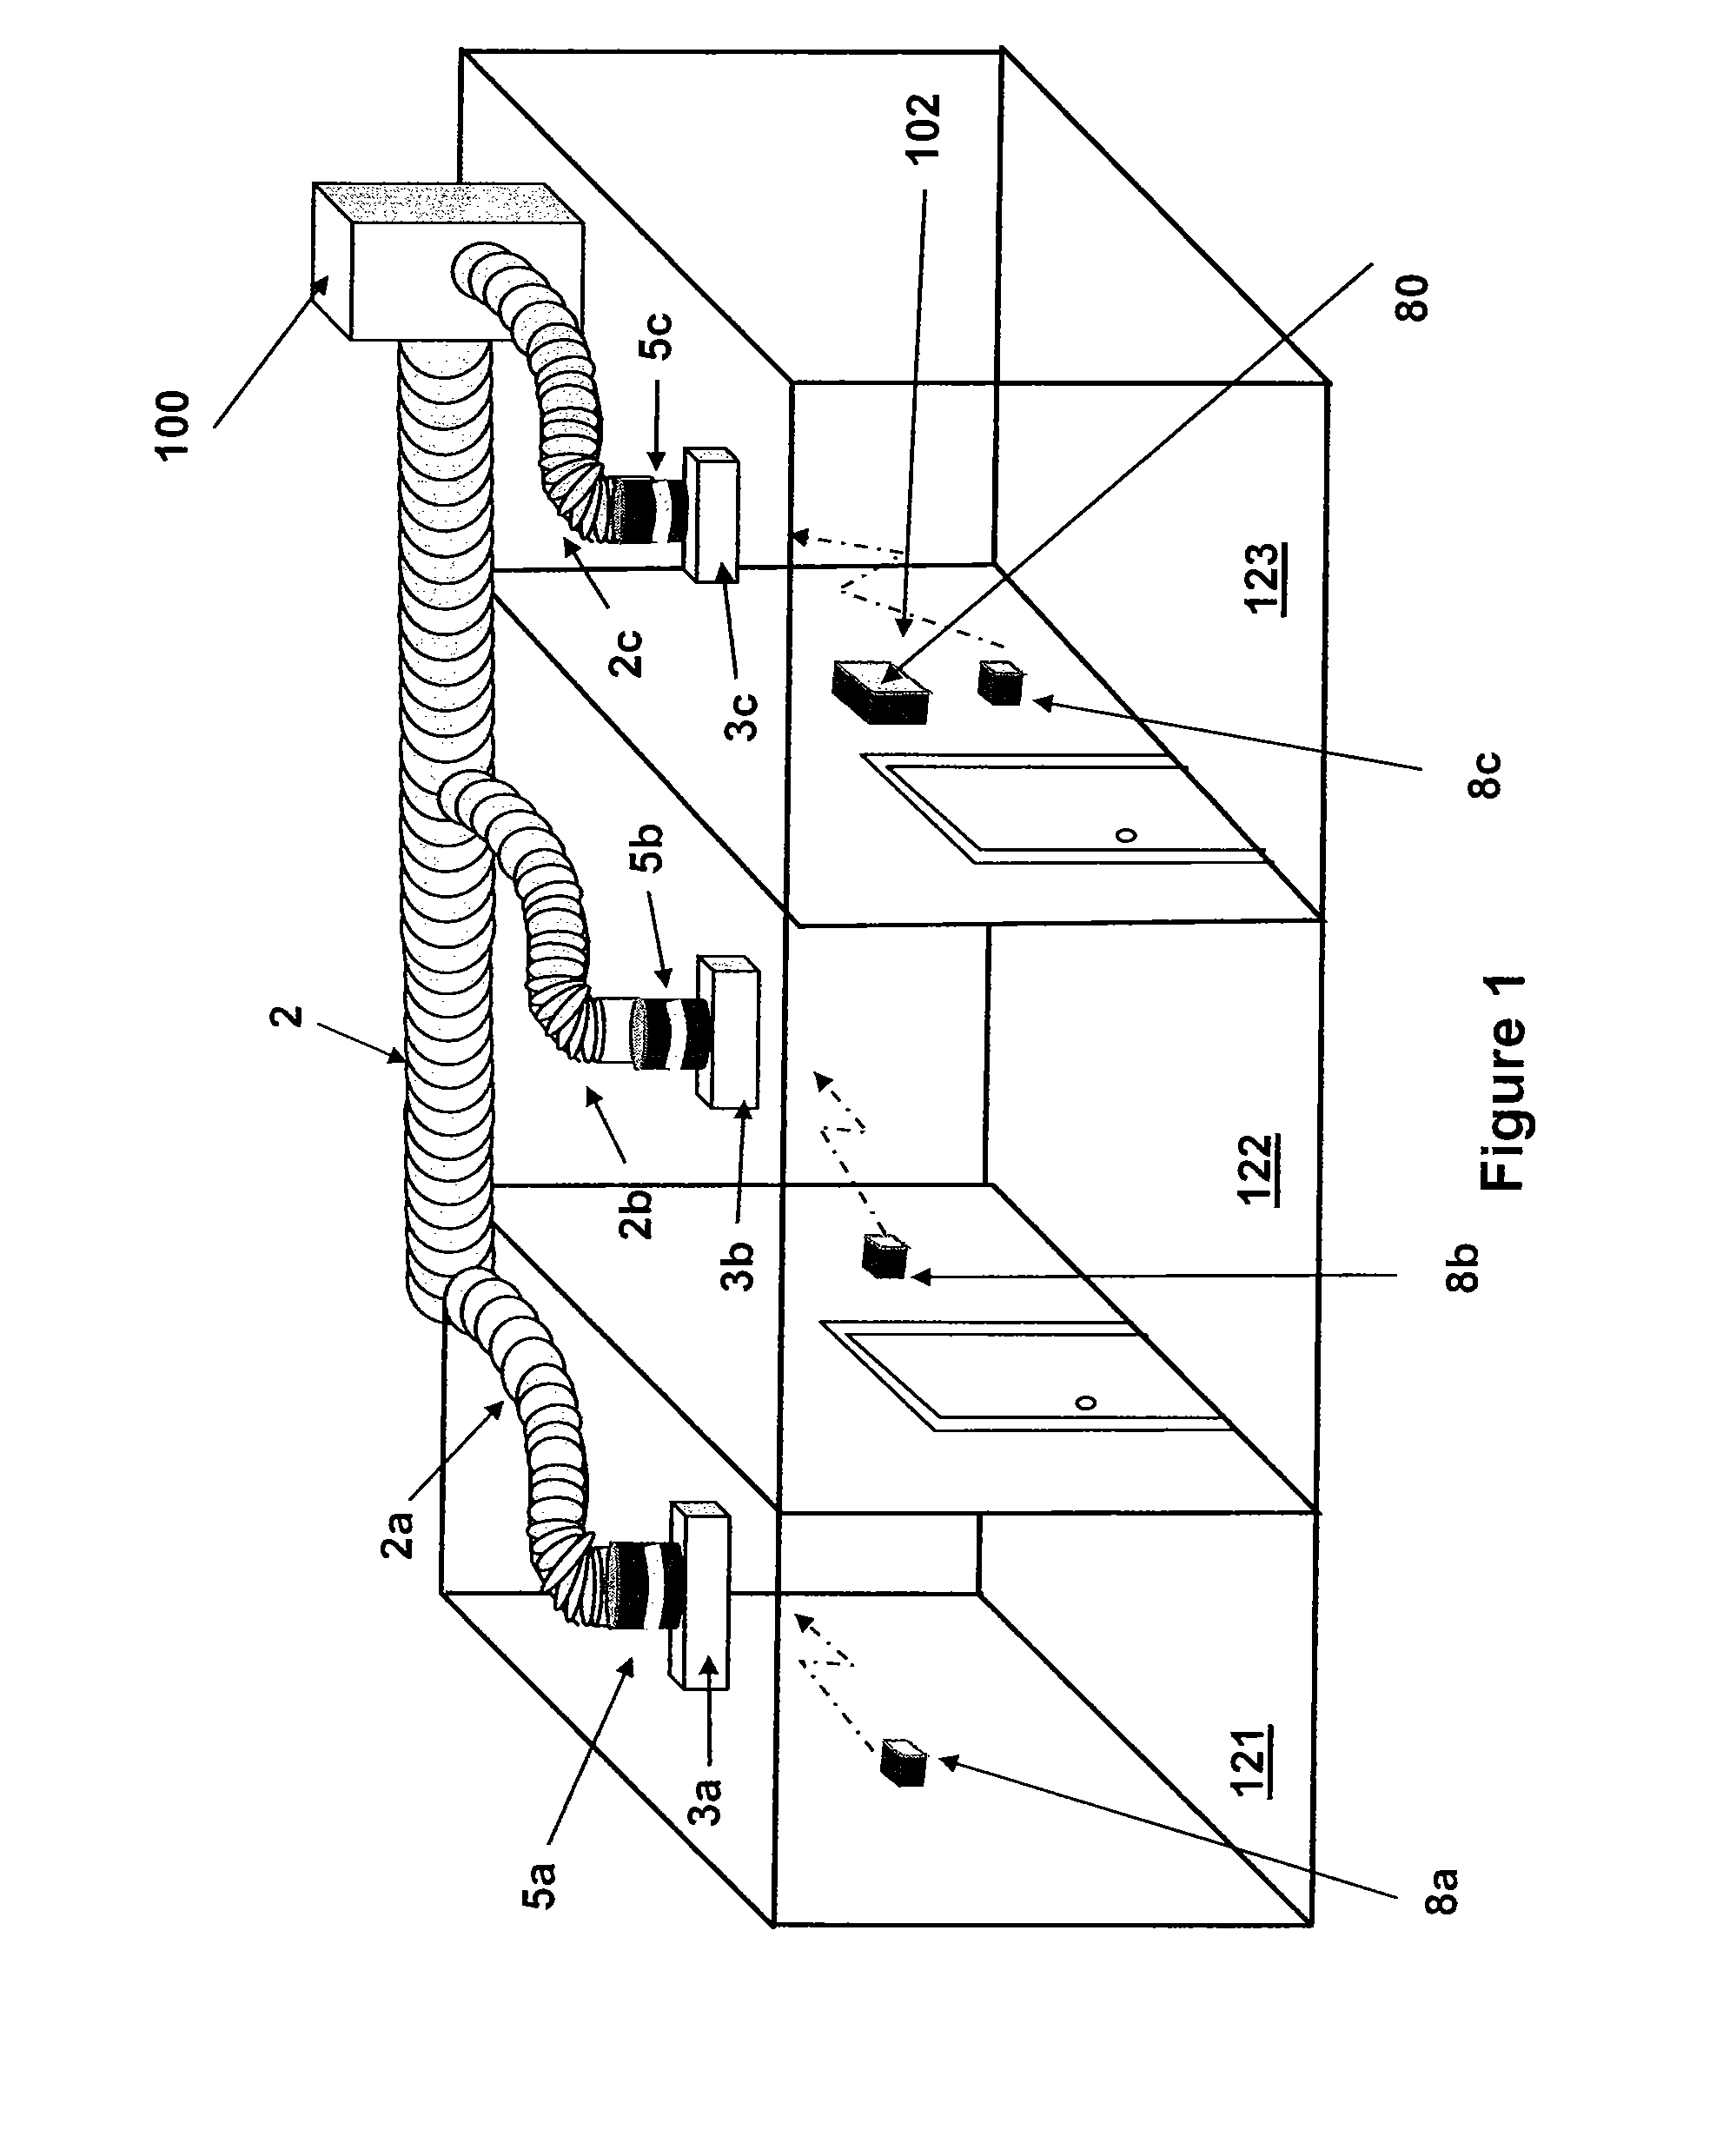 Airflow control system